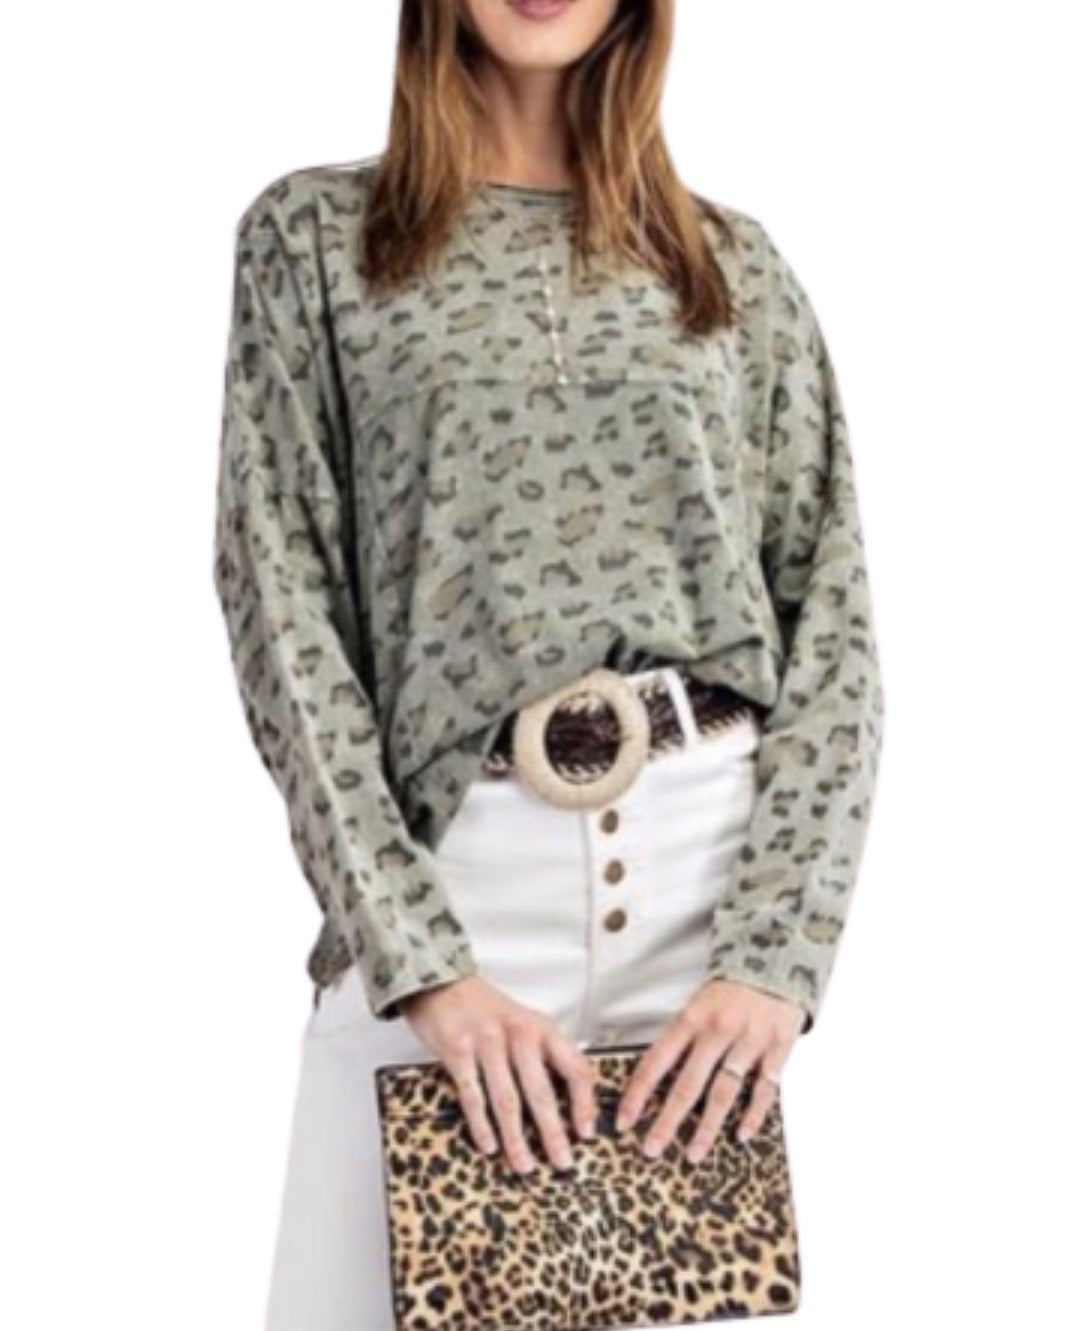 New ! Shannae Faded Olive Leopard Print Top - Glamco Boutique 